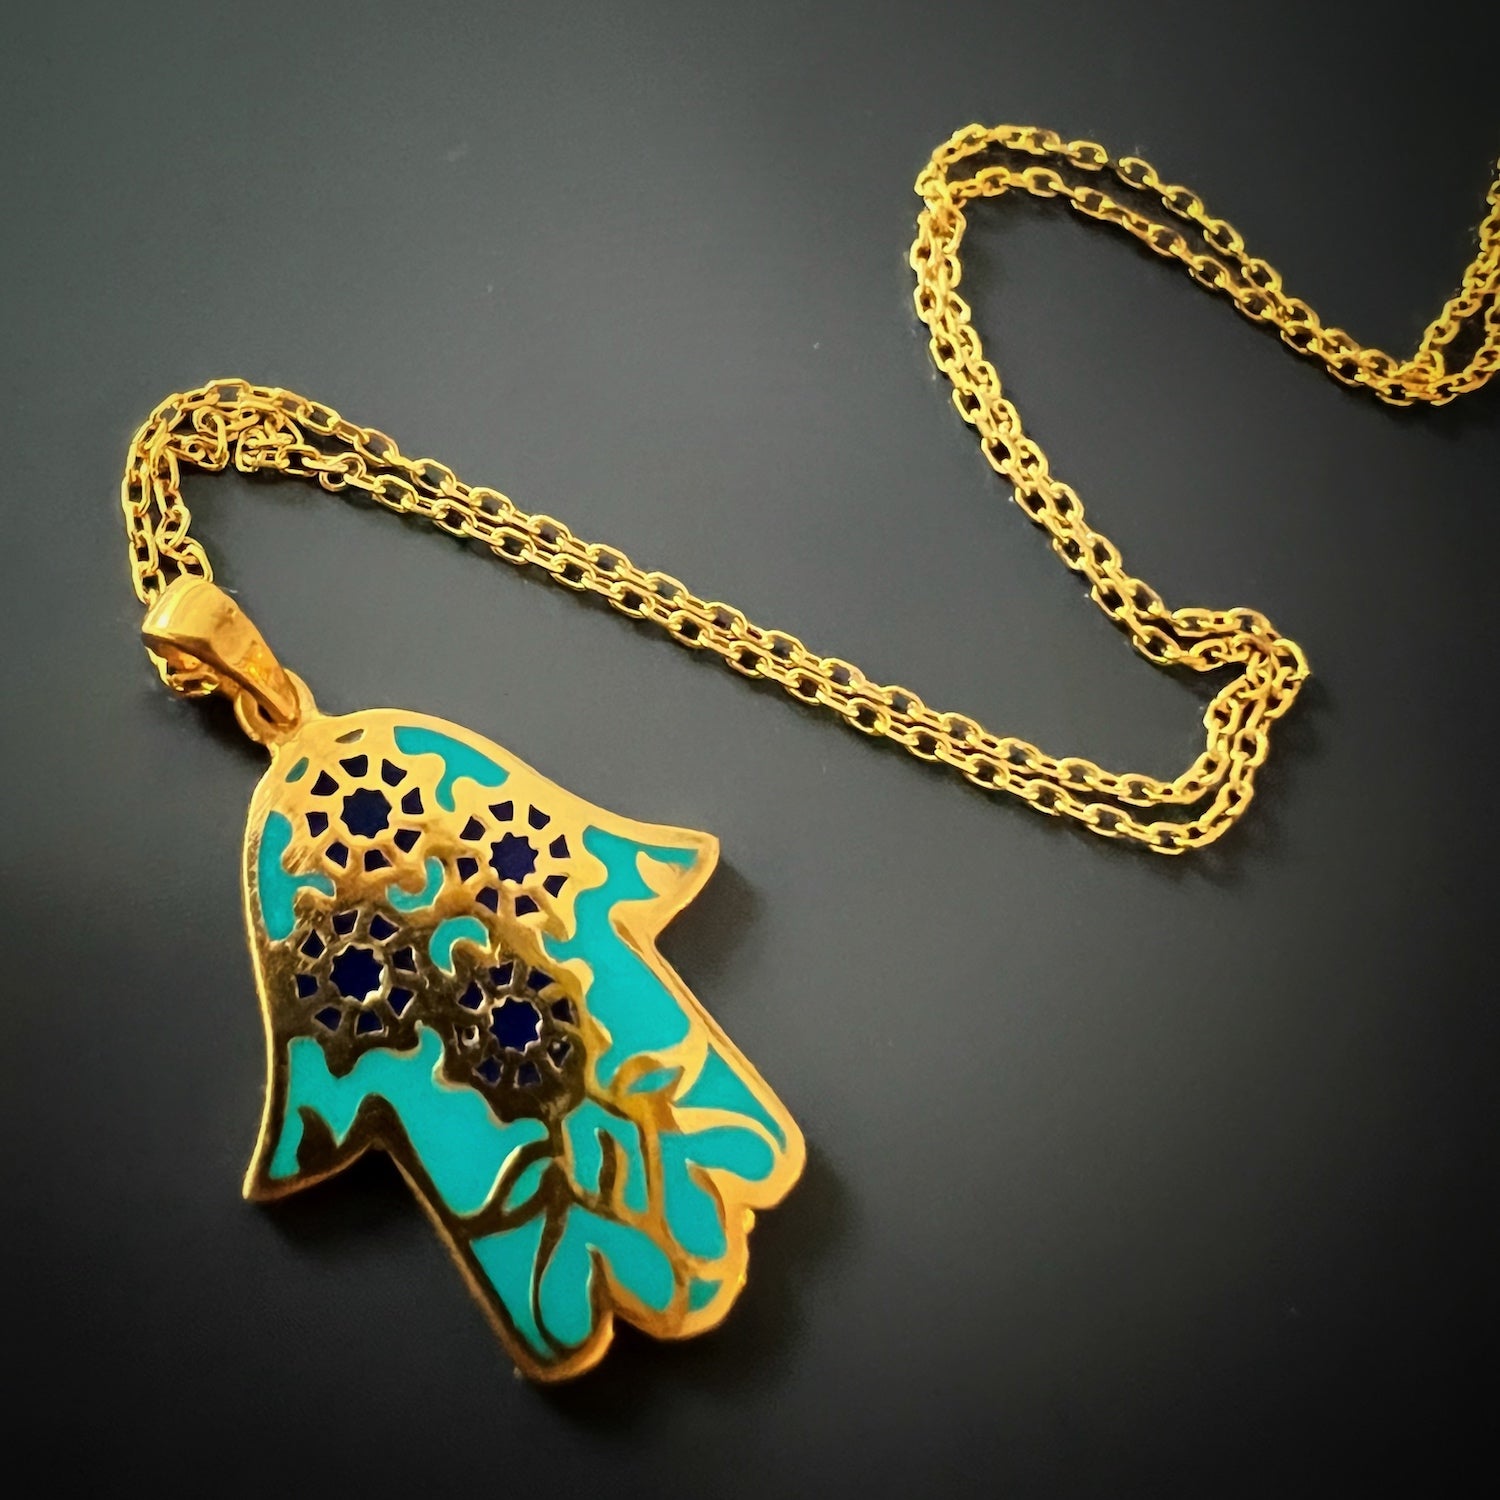 A detailed shot of the beautifully crafted Hamsa pendant on the Good Vibes Enamel Hamsa Necklace.